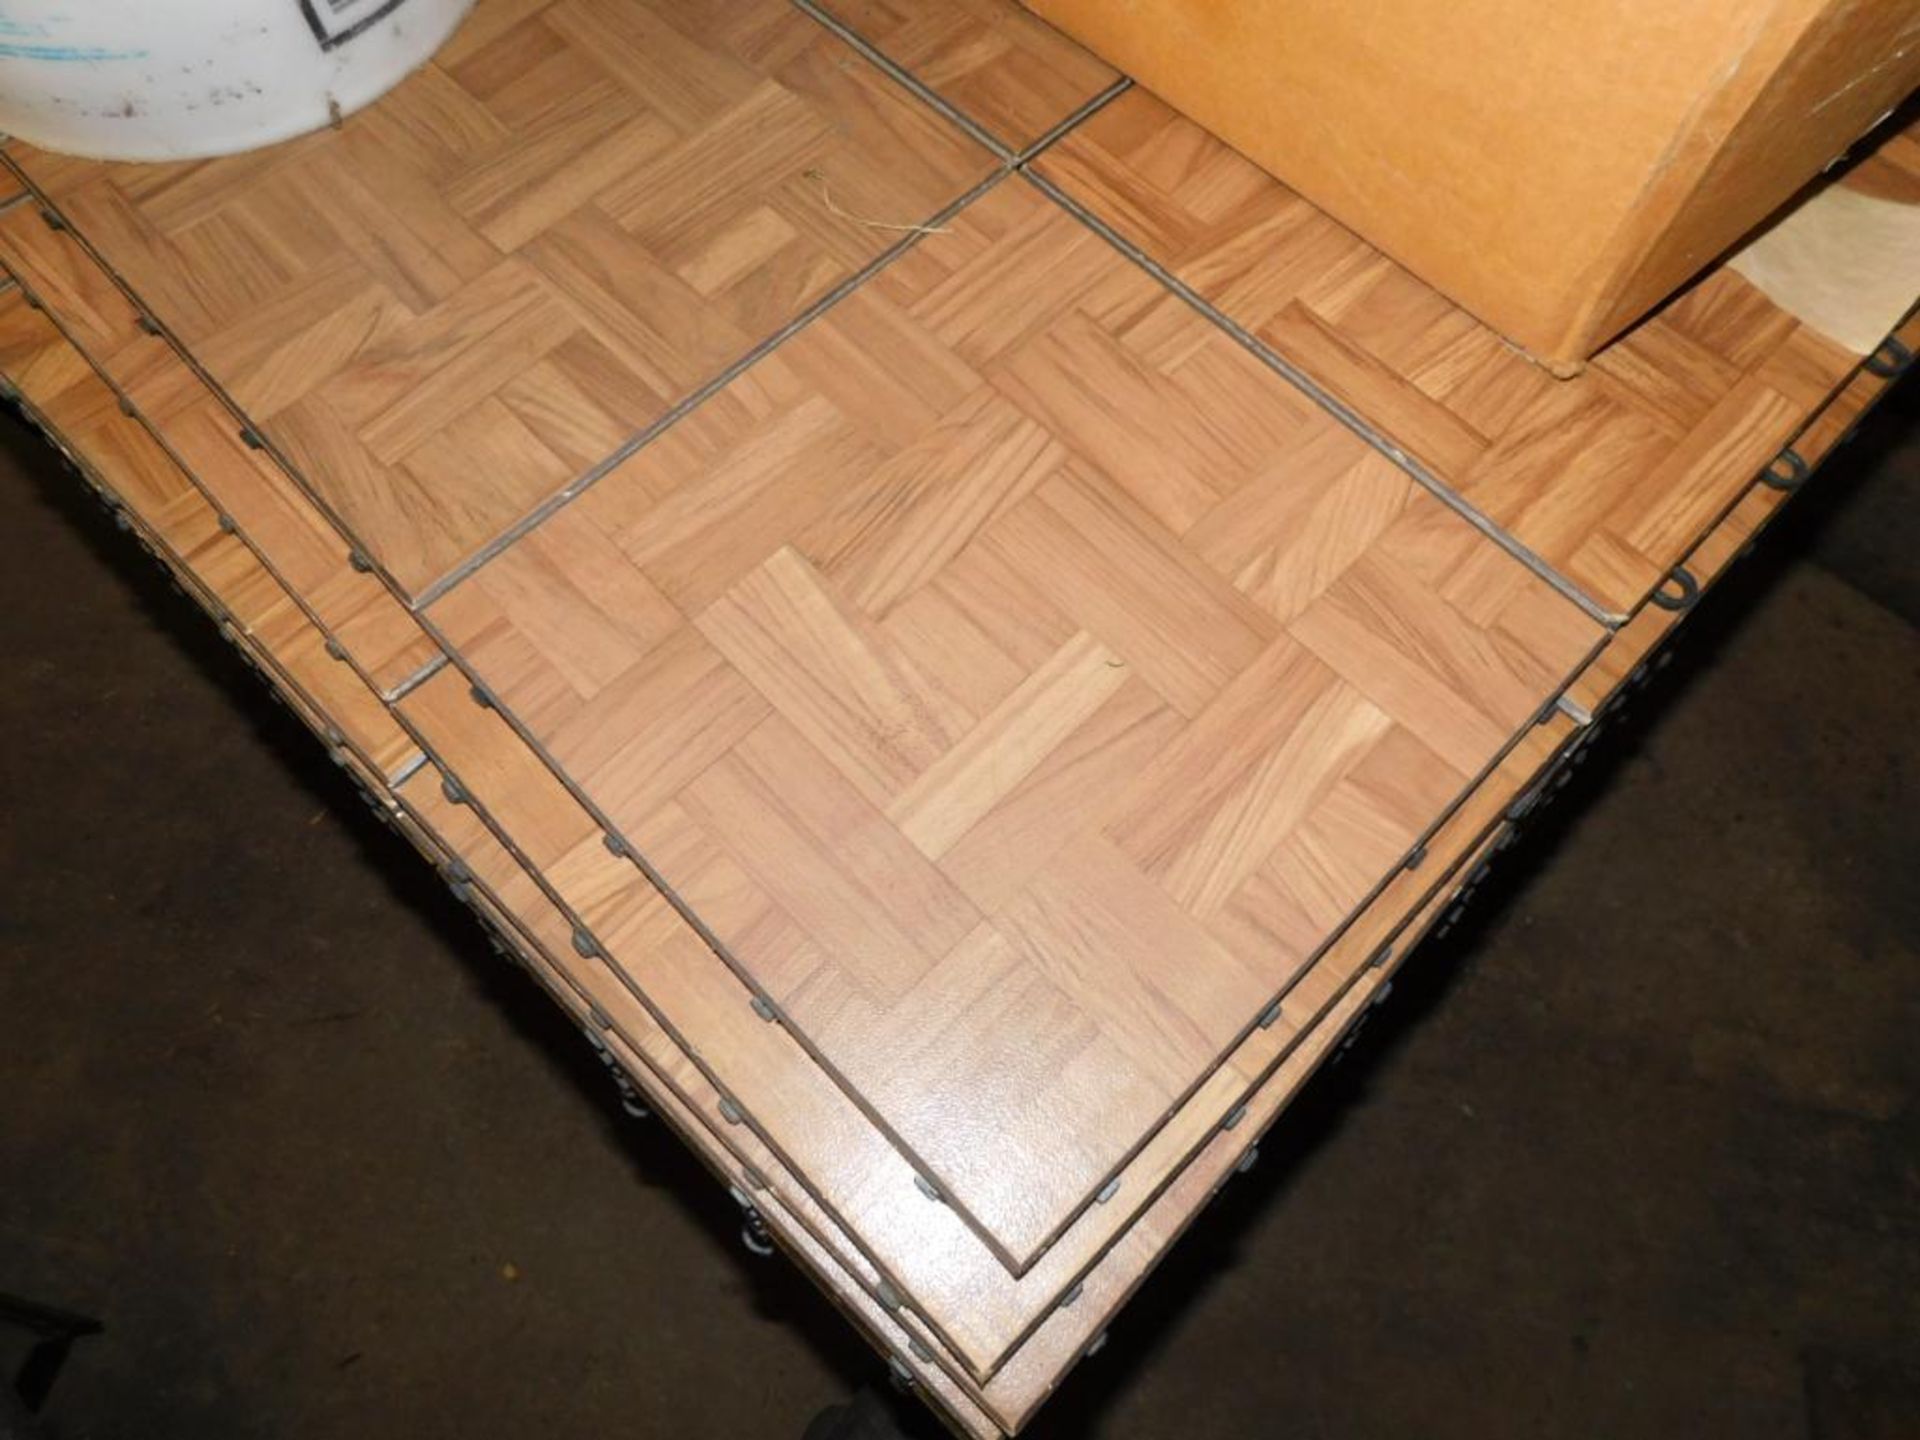 LOT: (37) Sections 3' x 3' Snap Lock Wood W/Edge Pieces Dance Flooring on Cart - Image 3 of 4